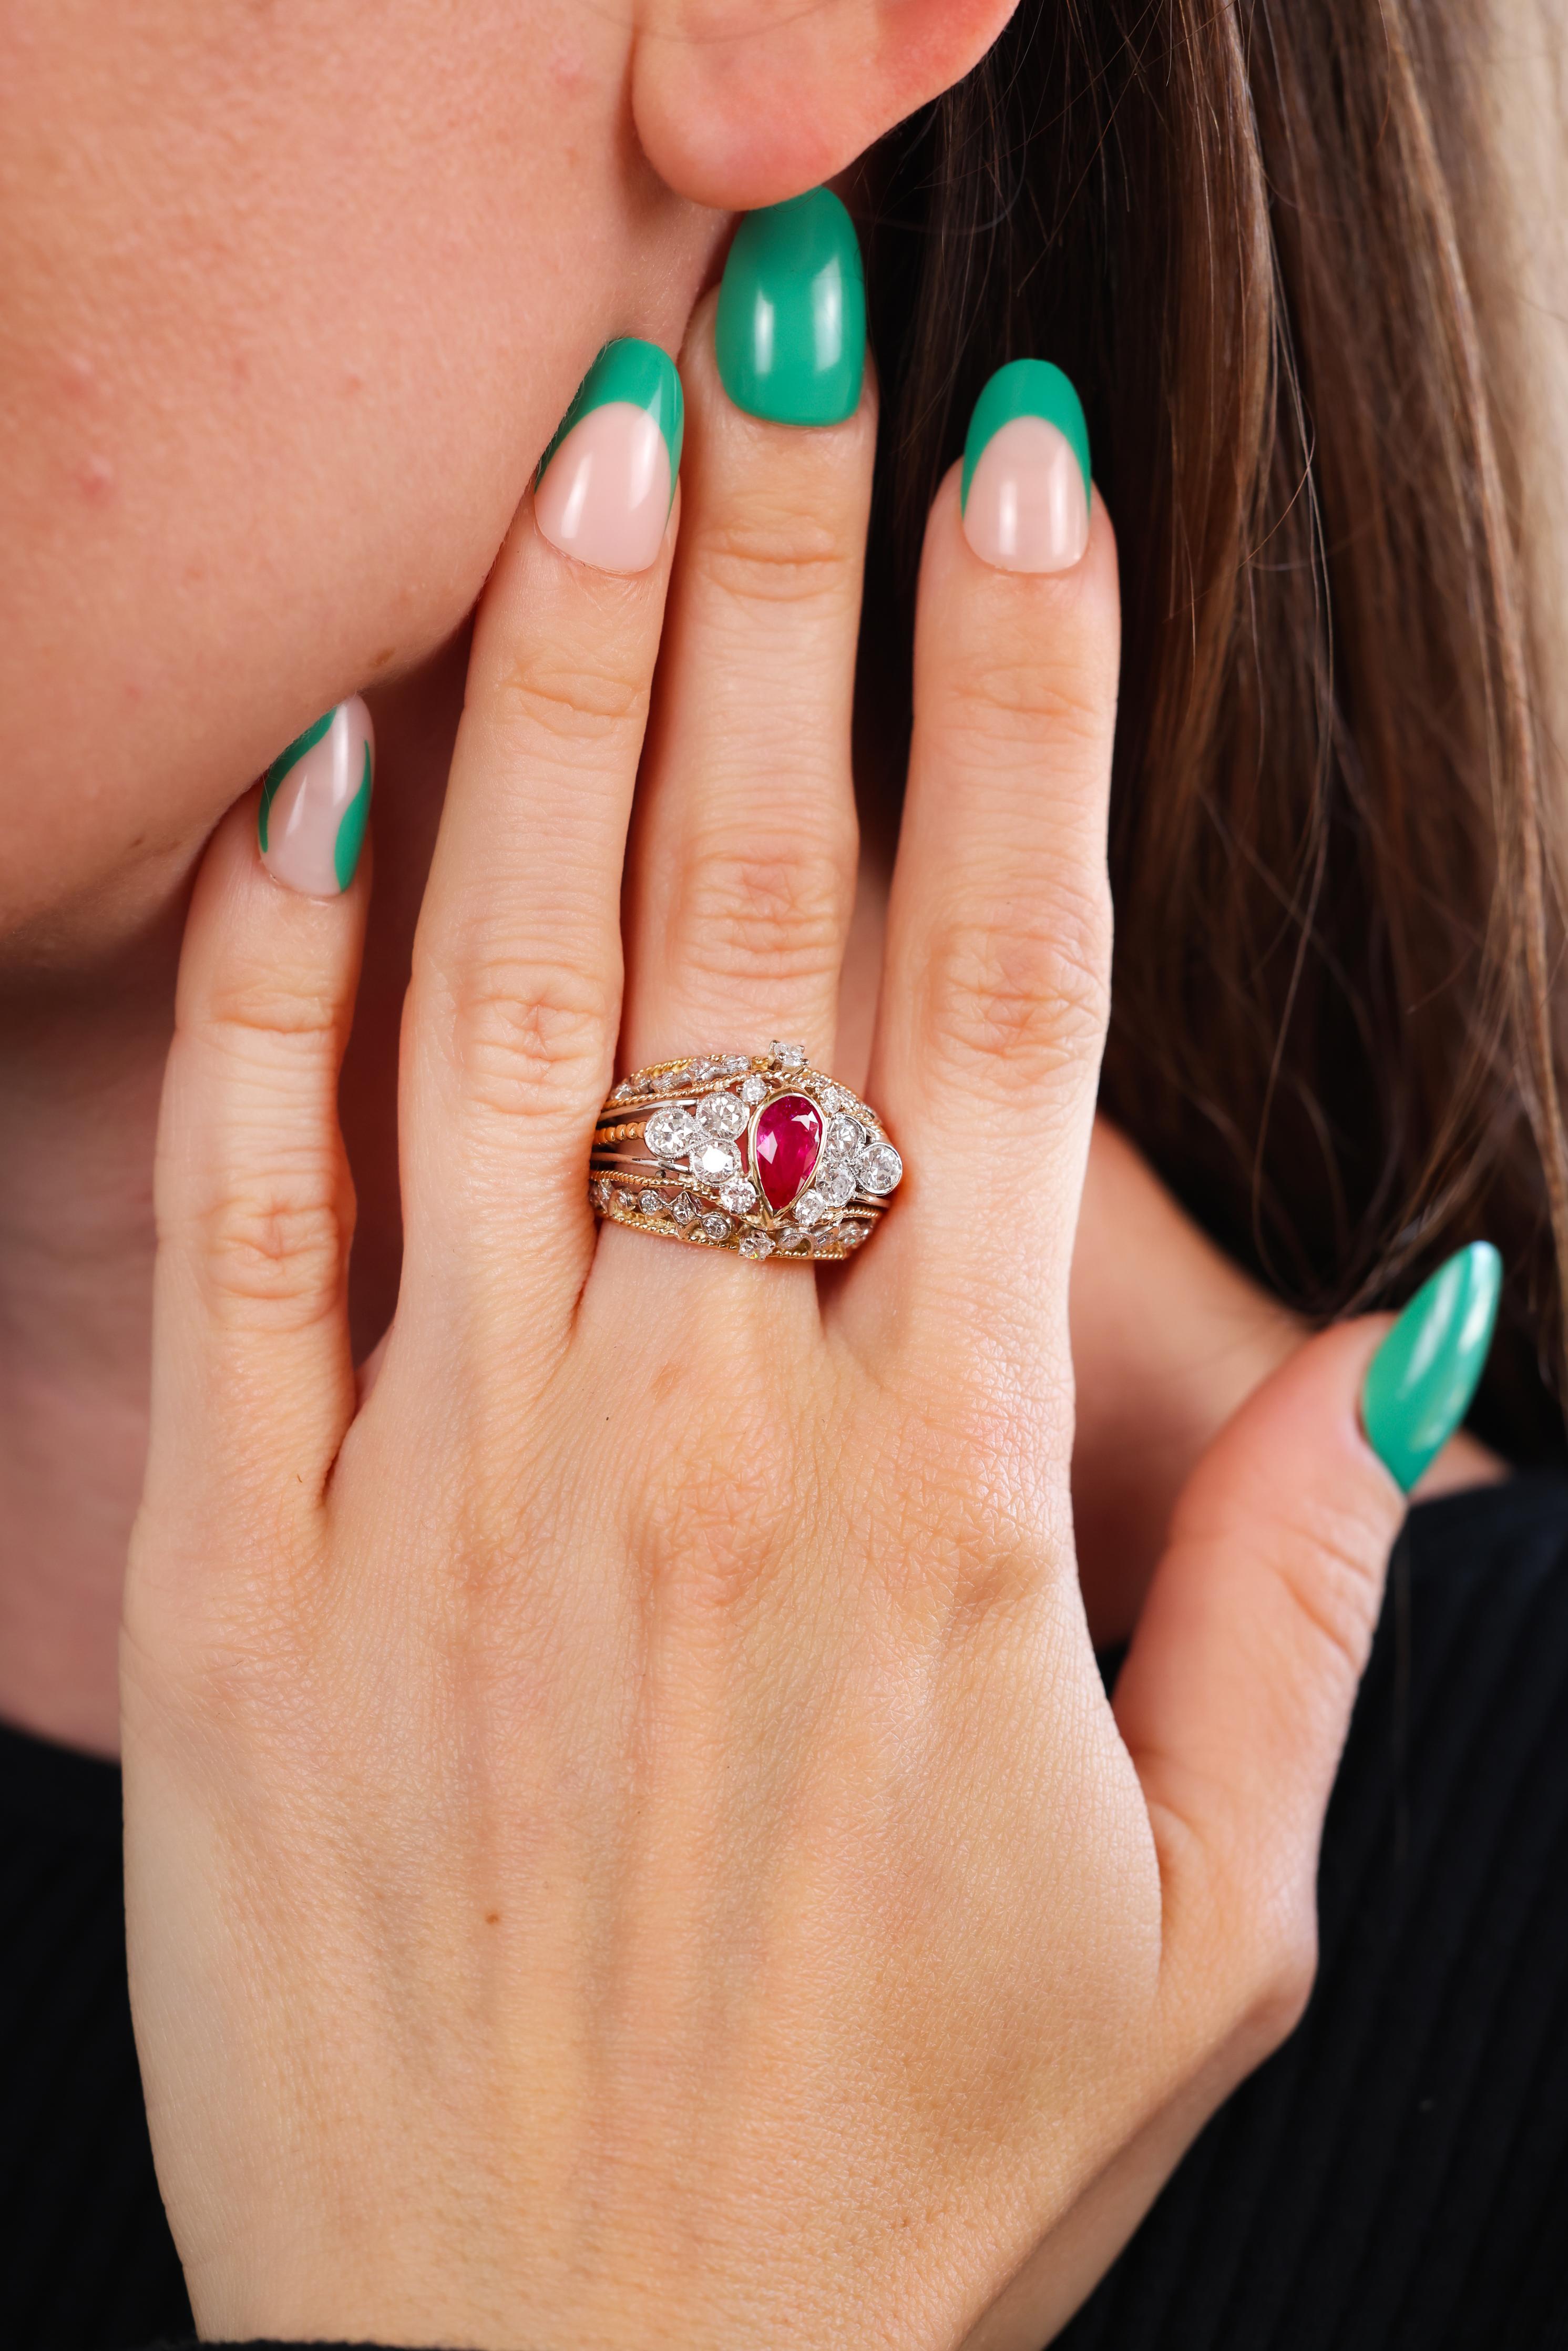 Center Stone: Ruby
Cut: Pear shape 
Weight: 1.20 carats approximately 
Accent Stone: 24 diamonds 
Cut: Old European and single
Weight: 1 carat approximately 
Color: G-H
Clarity: VS
Metal: 18k yellow gold
Era: Retro
Circa: 1940s
Size: 6-1/2 and can